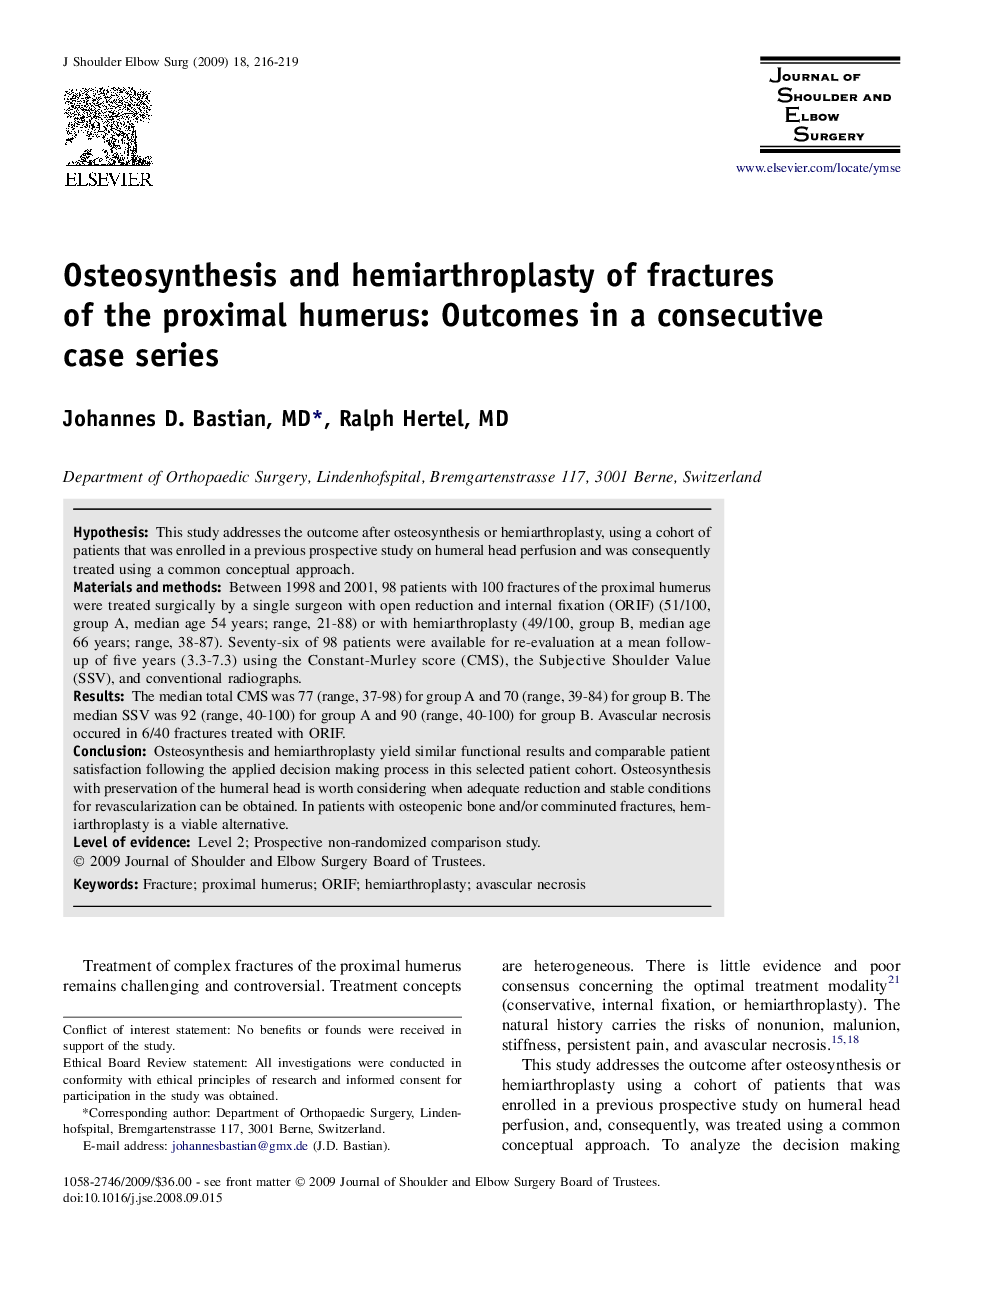 Osteosynthesis and hemiarthroplasty of fractures of the proximal humerus: Outcomes in a consecutive case series 